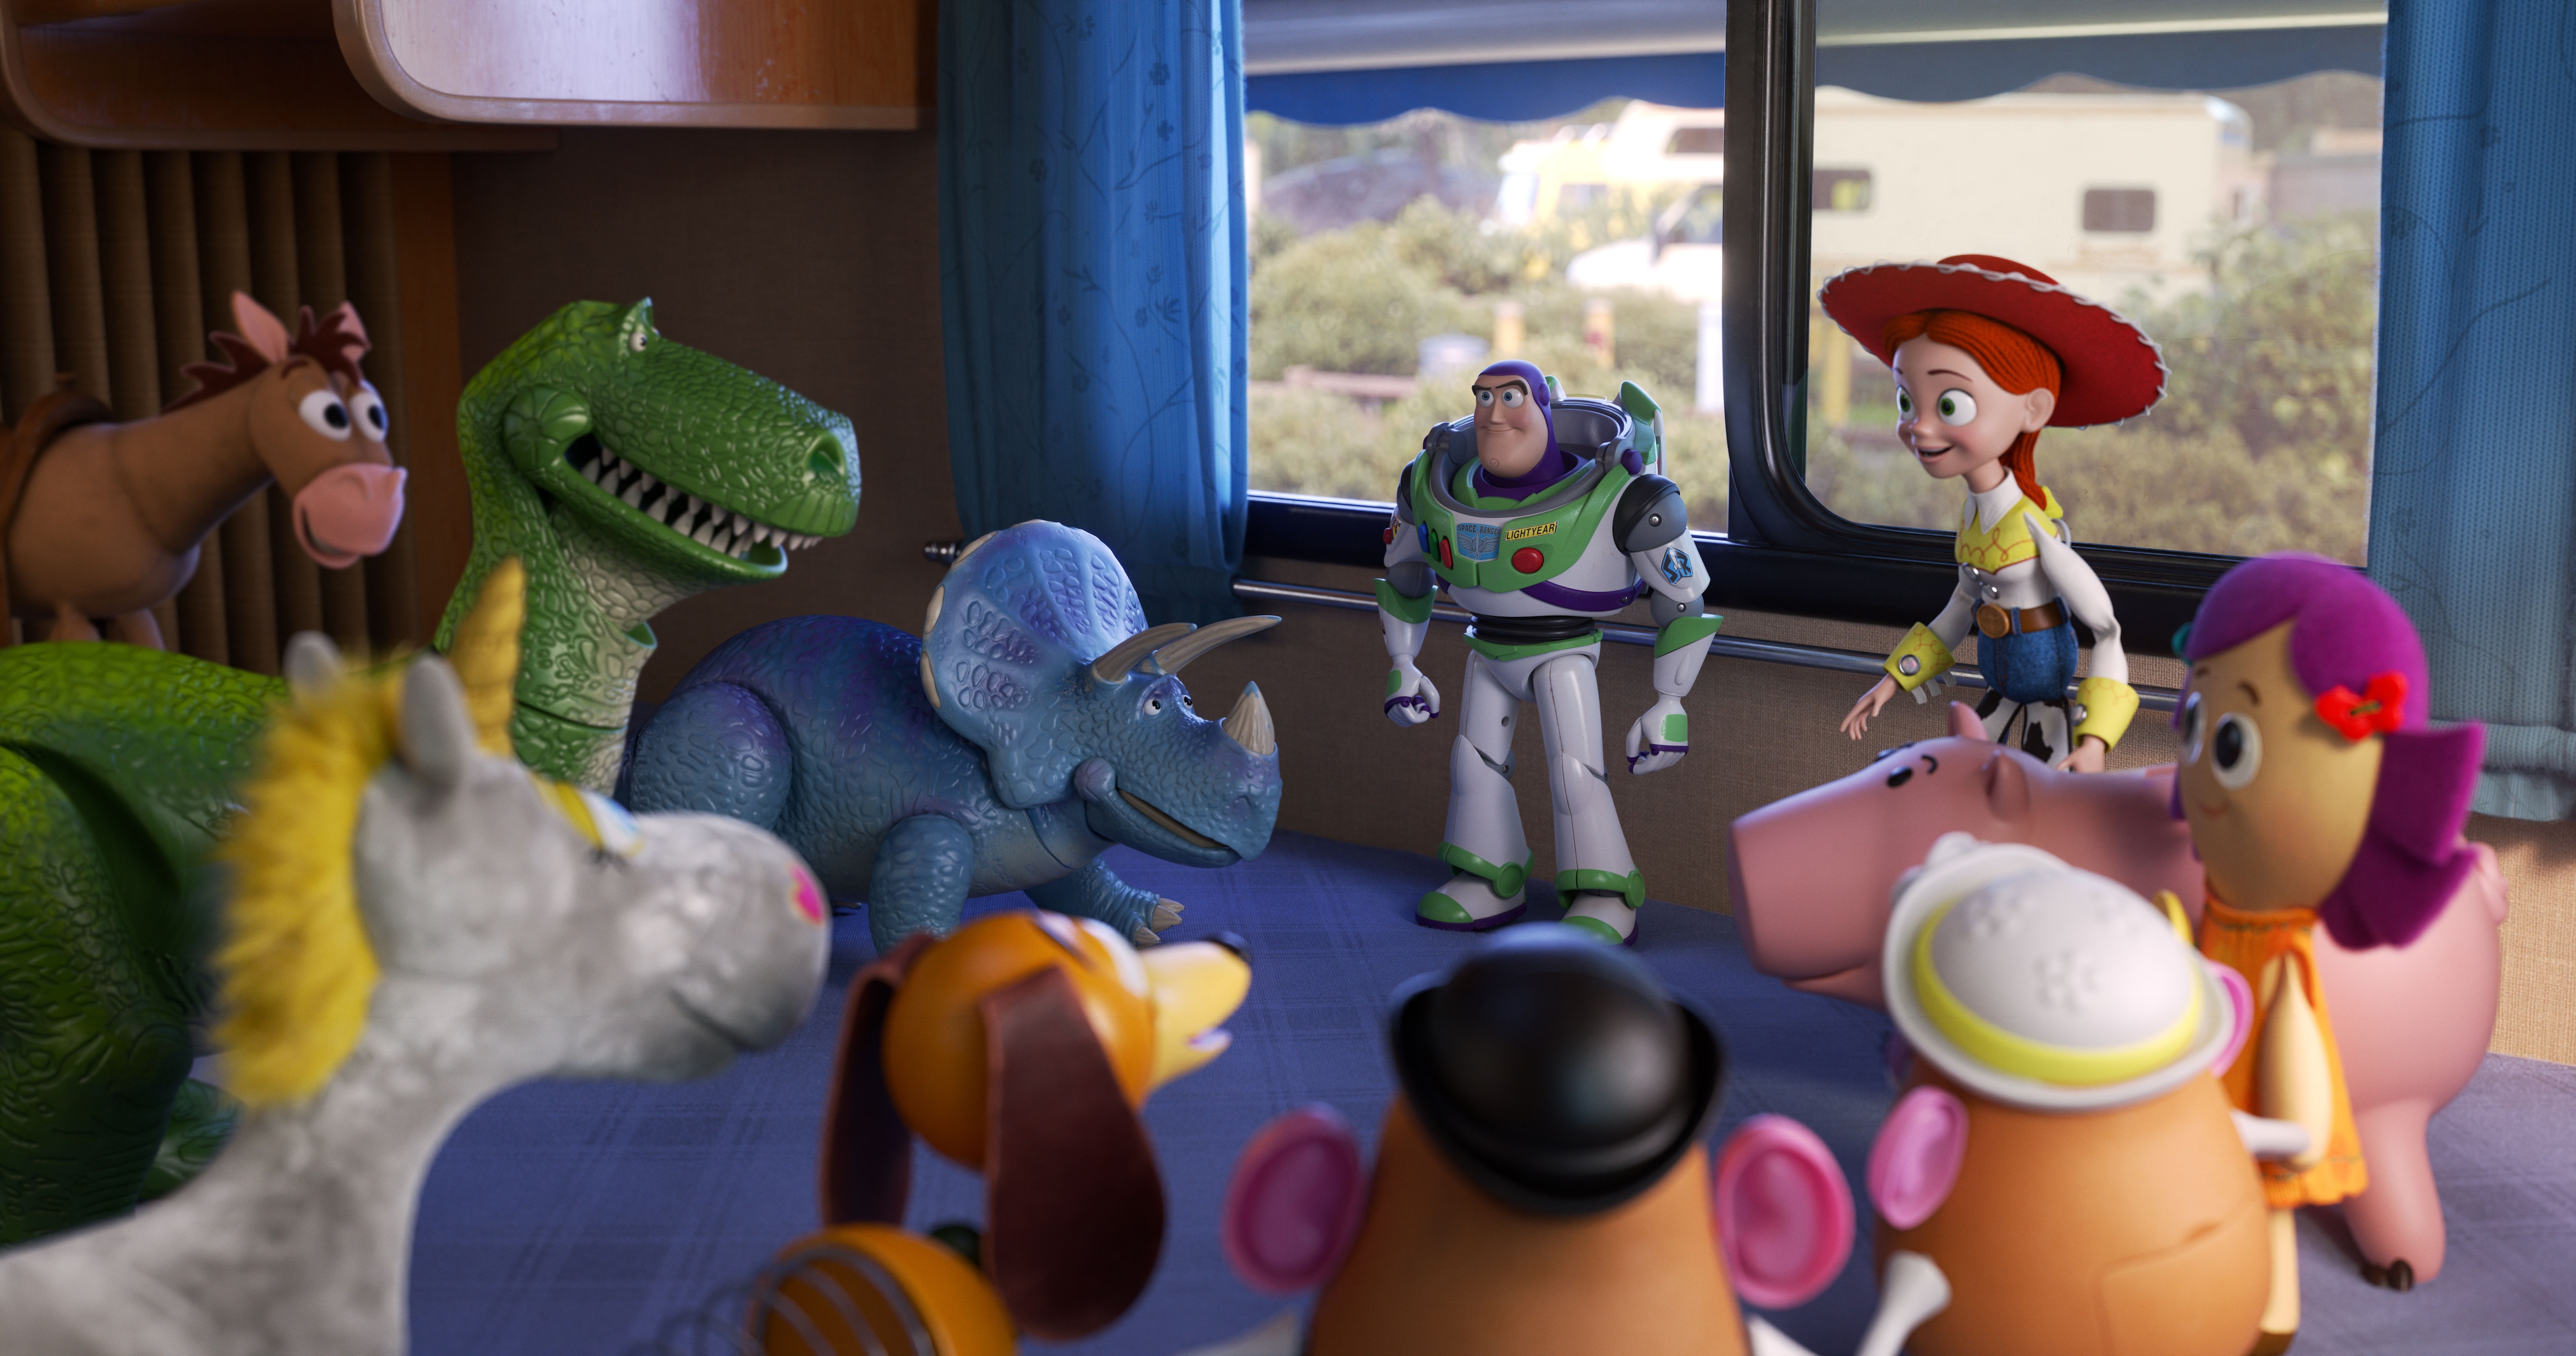 Toy Story coolest, most details we learned onset | SYFY WIRE